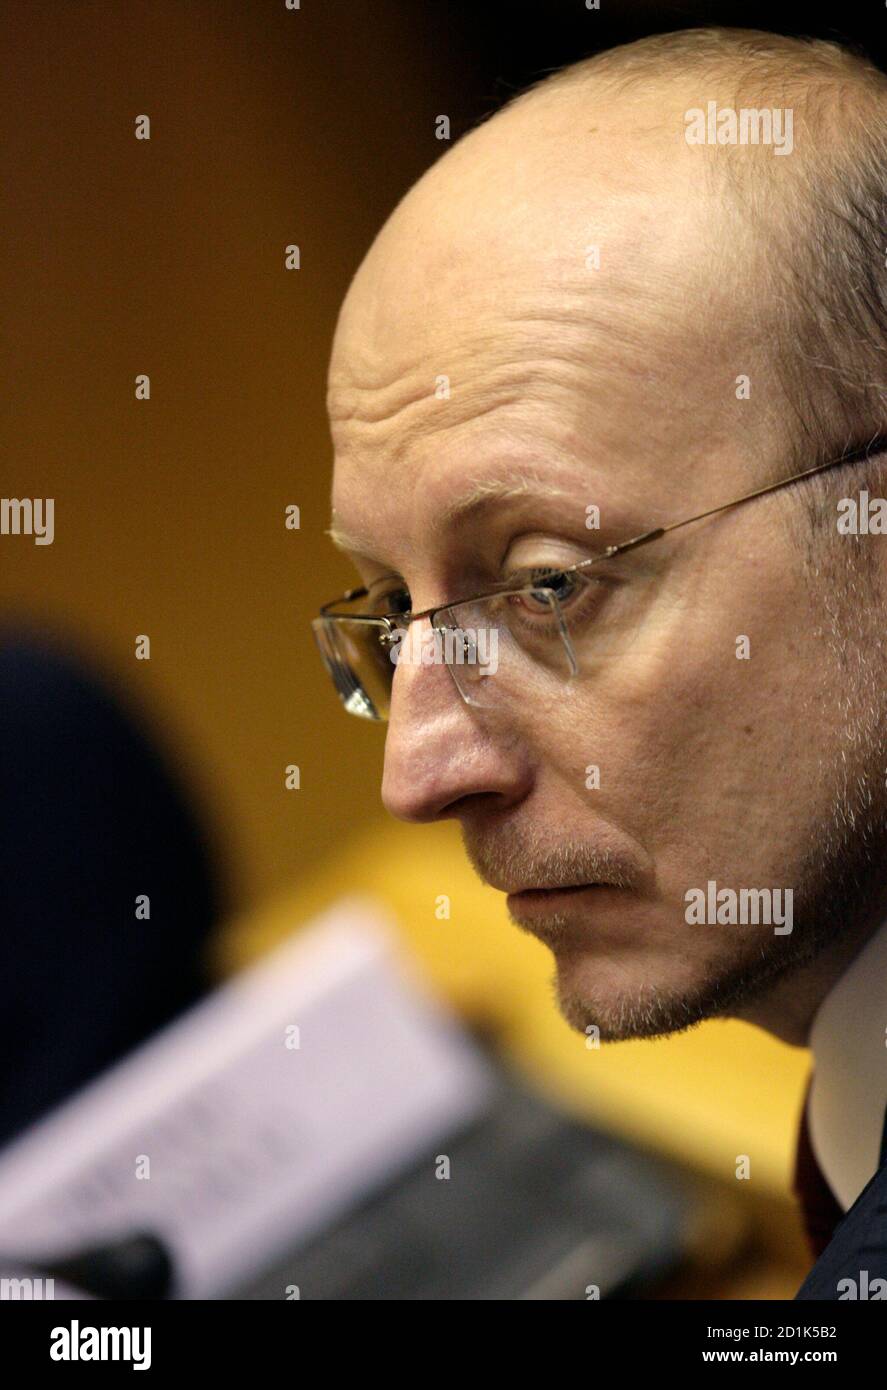 National Resurrection Party leader Arunas Valinskas attends the first session of a new Lithuanian parliament (Seimas) in Vilnius November 17, 2008. REUTERS/Ints Kalnins (LITHUANIA) Stock Photo